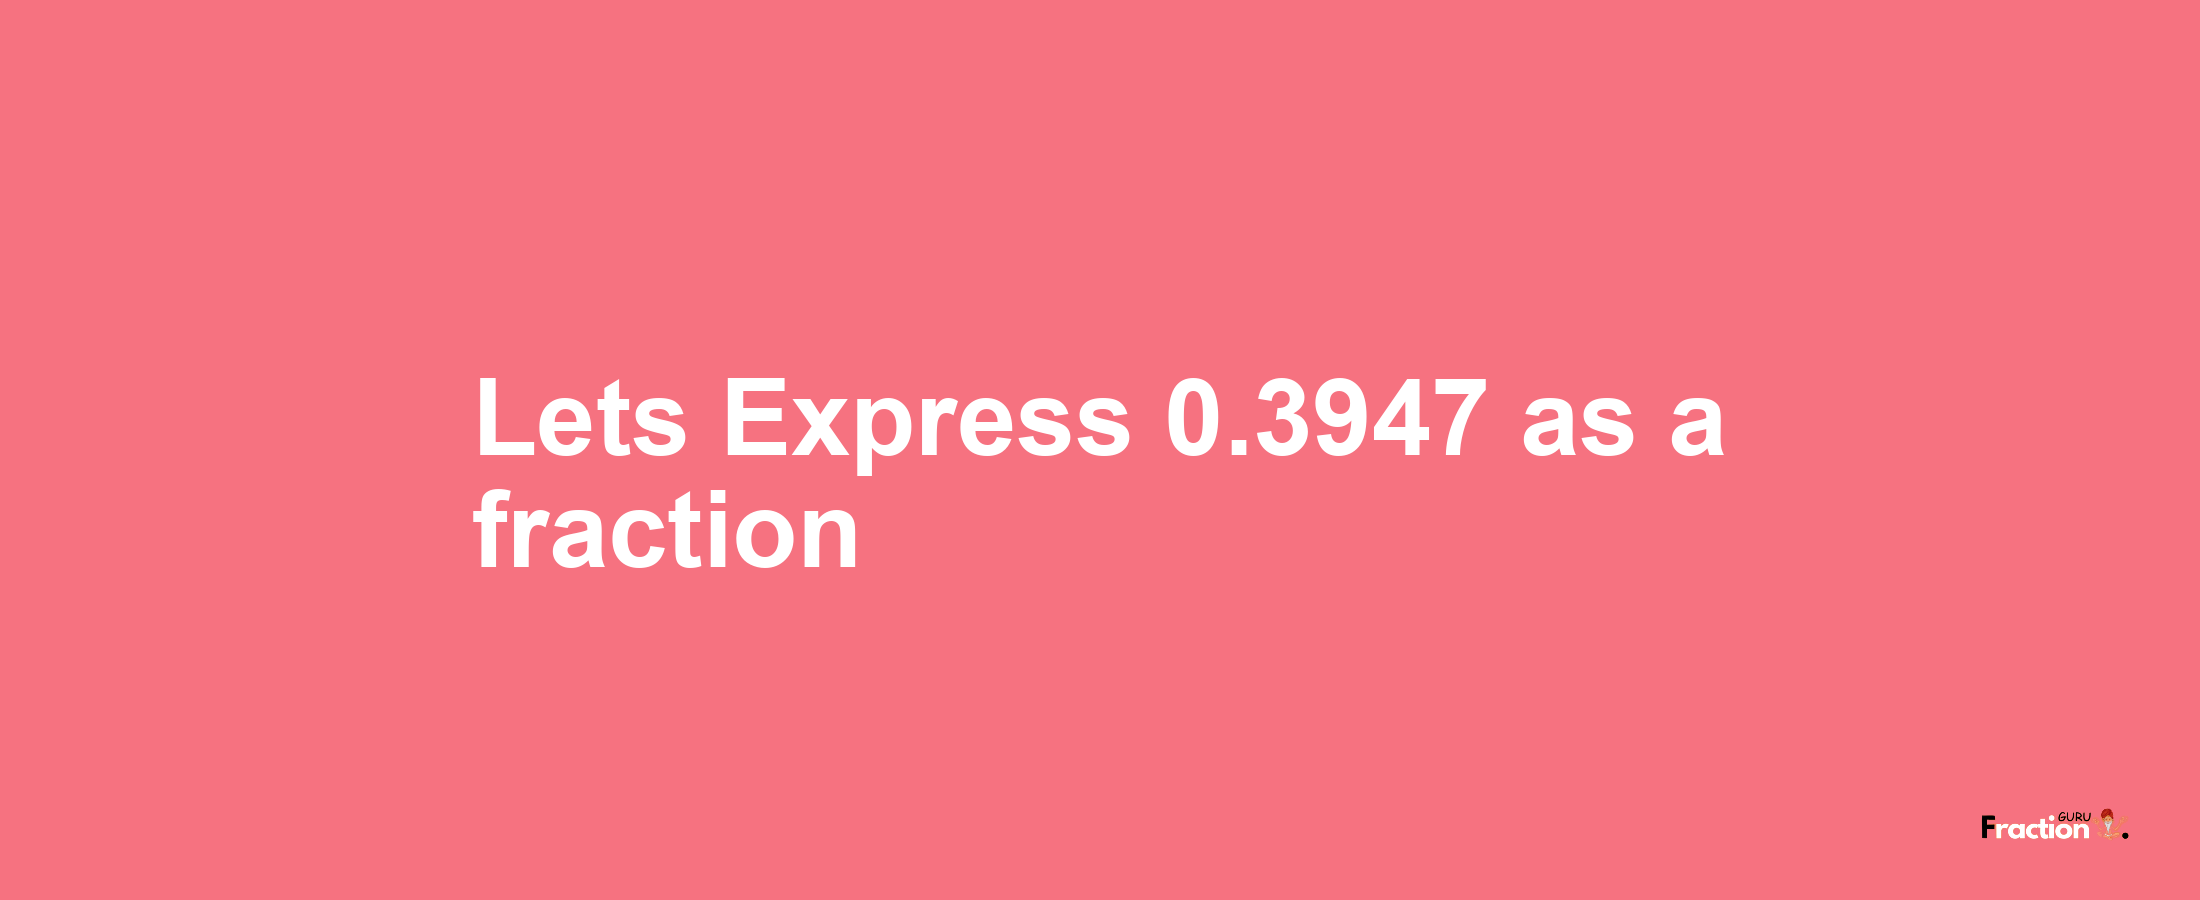 Lets Express 0.3947 as afraction